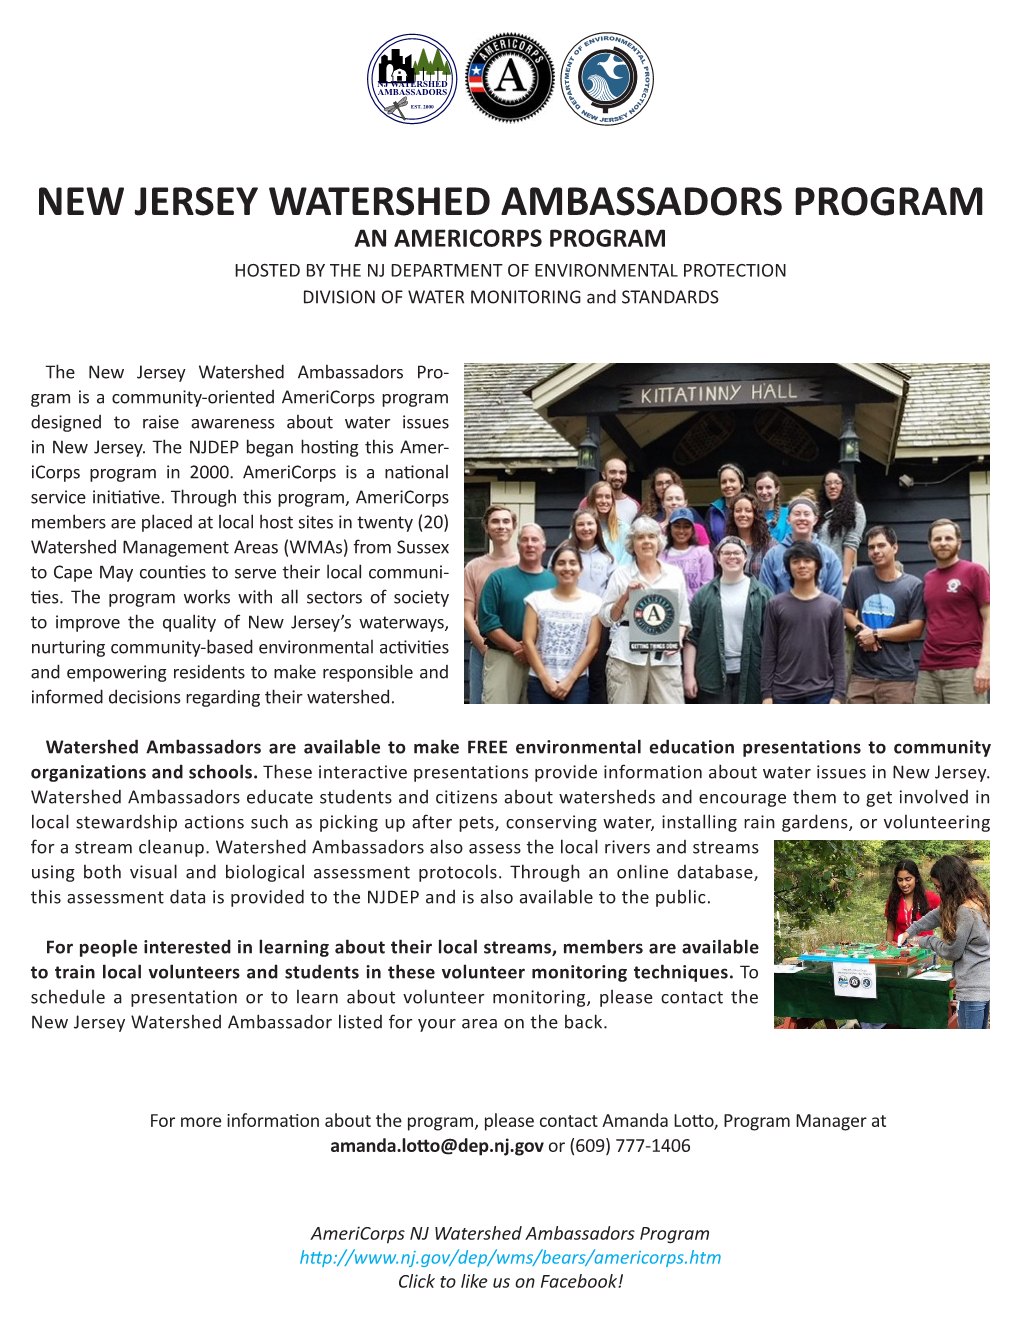 NEW JERSEY WATERSHED AMBASSADORS PROGRAM an AMERICORPS PROGRAM HOSTED by the NJ DEPARTMENT of ENVIRONMENTAL PROTECTION DIVISION of WATER MONITORING and STANDARDS